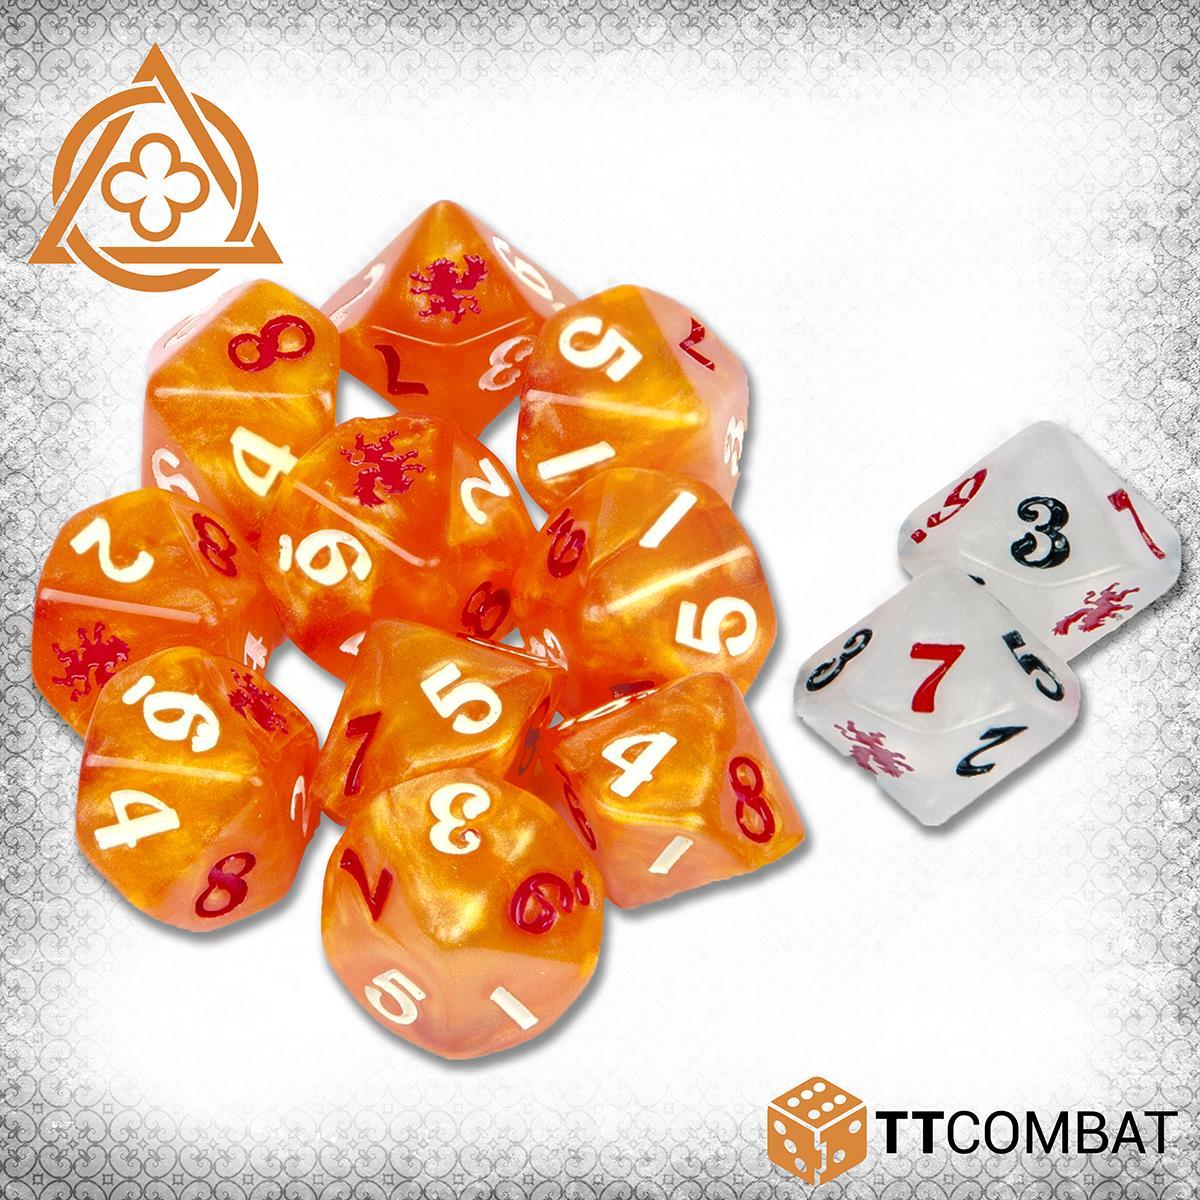 Pile of gifted dice